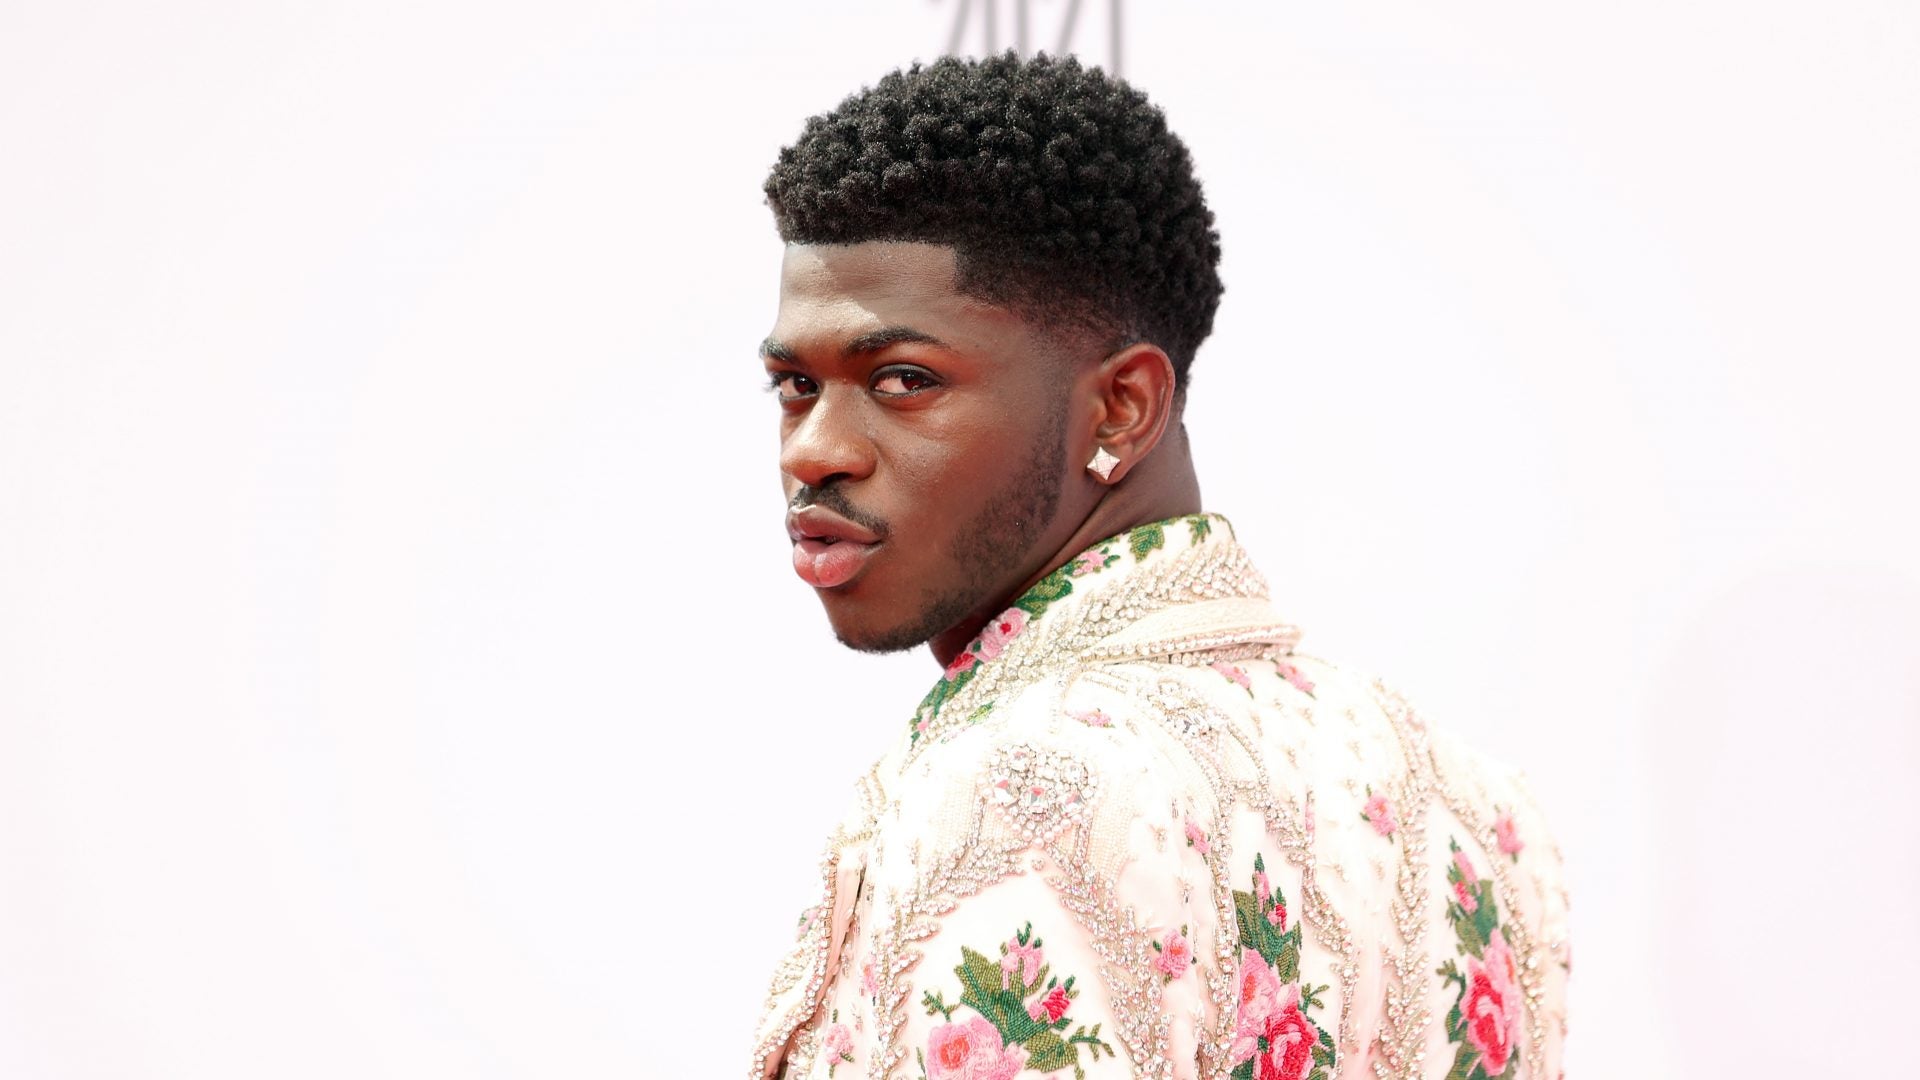 Lil Nas X Is A Gay Visionary That Music Needs